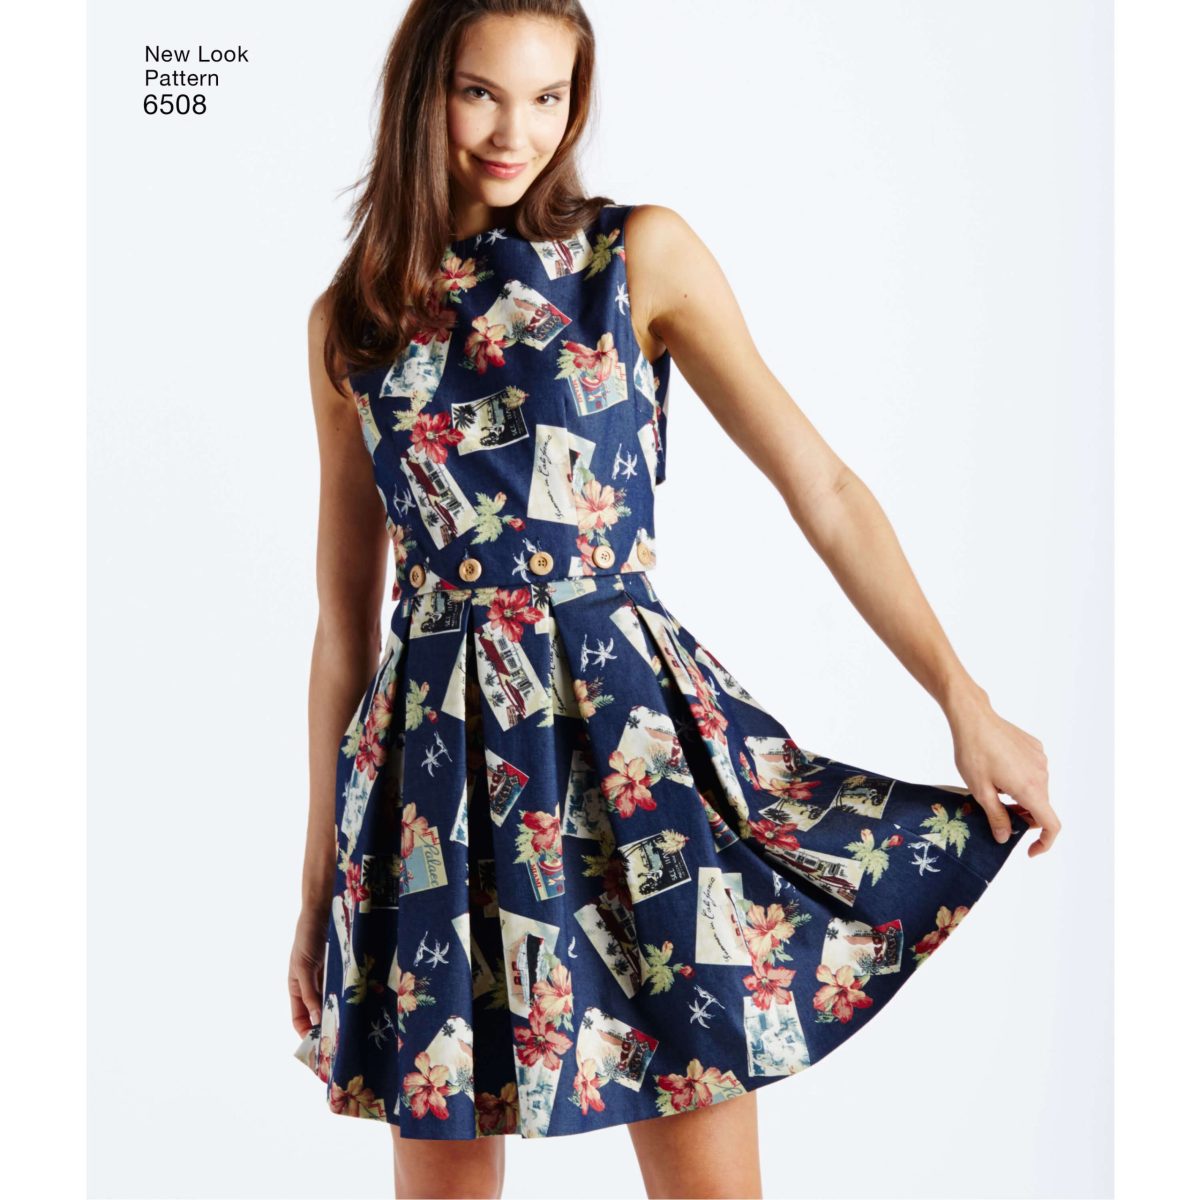 New Look Pattern 6508 Misses' Dress with Open or Closed Back Variations